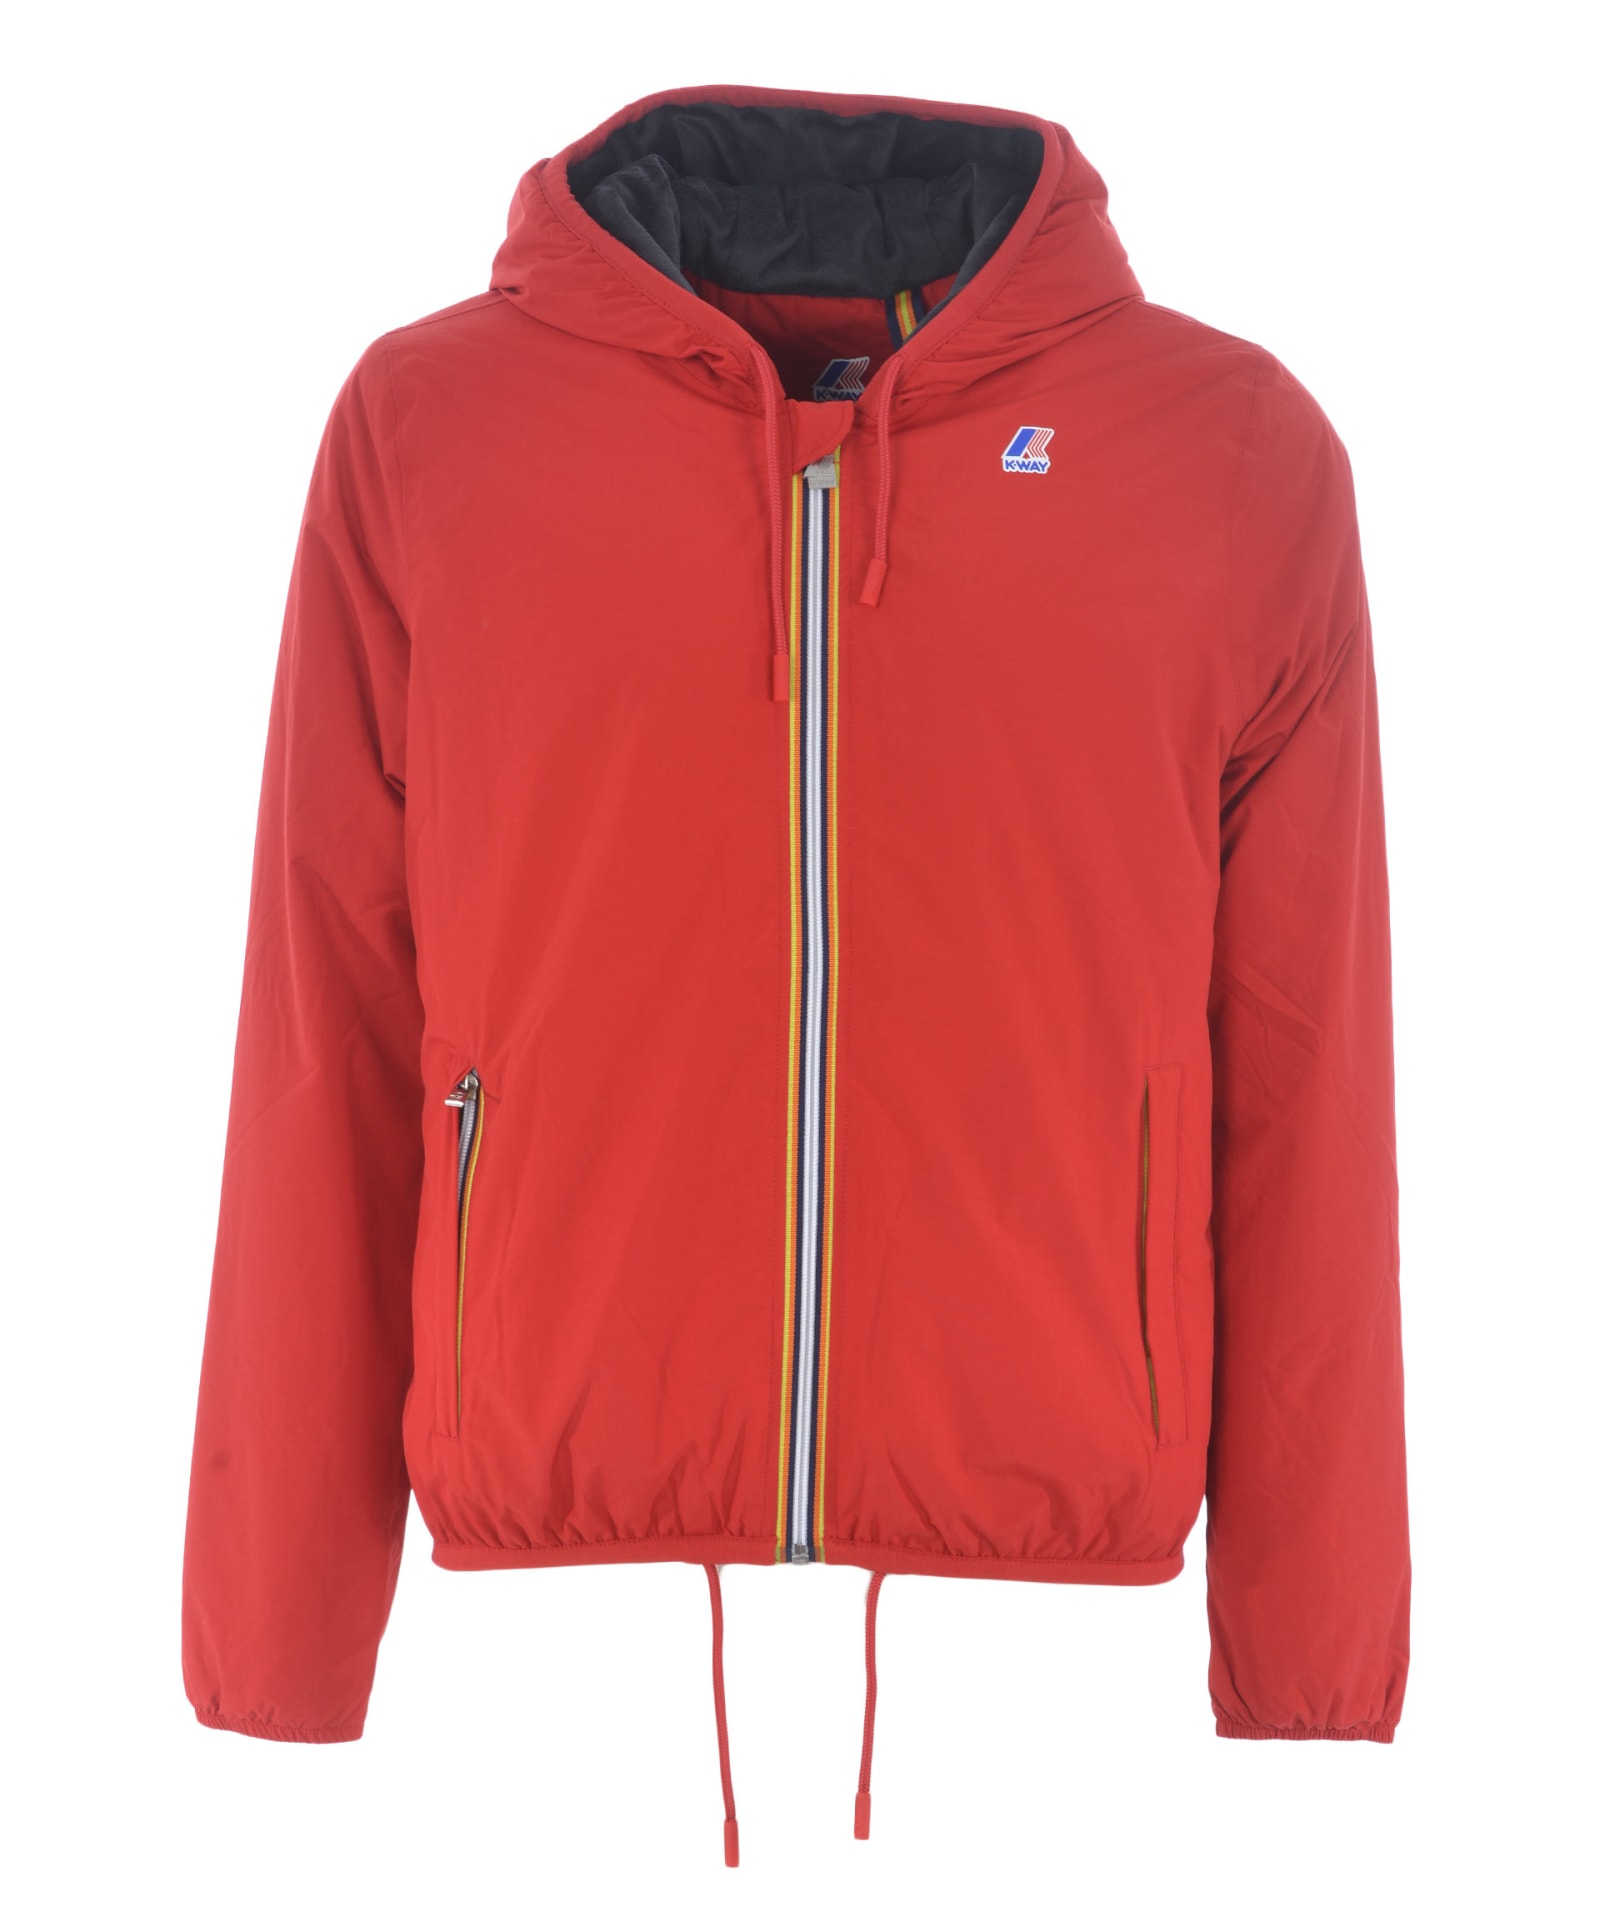 K-way Jacket In Rosso